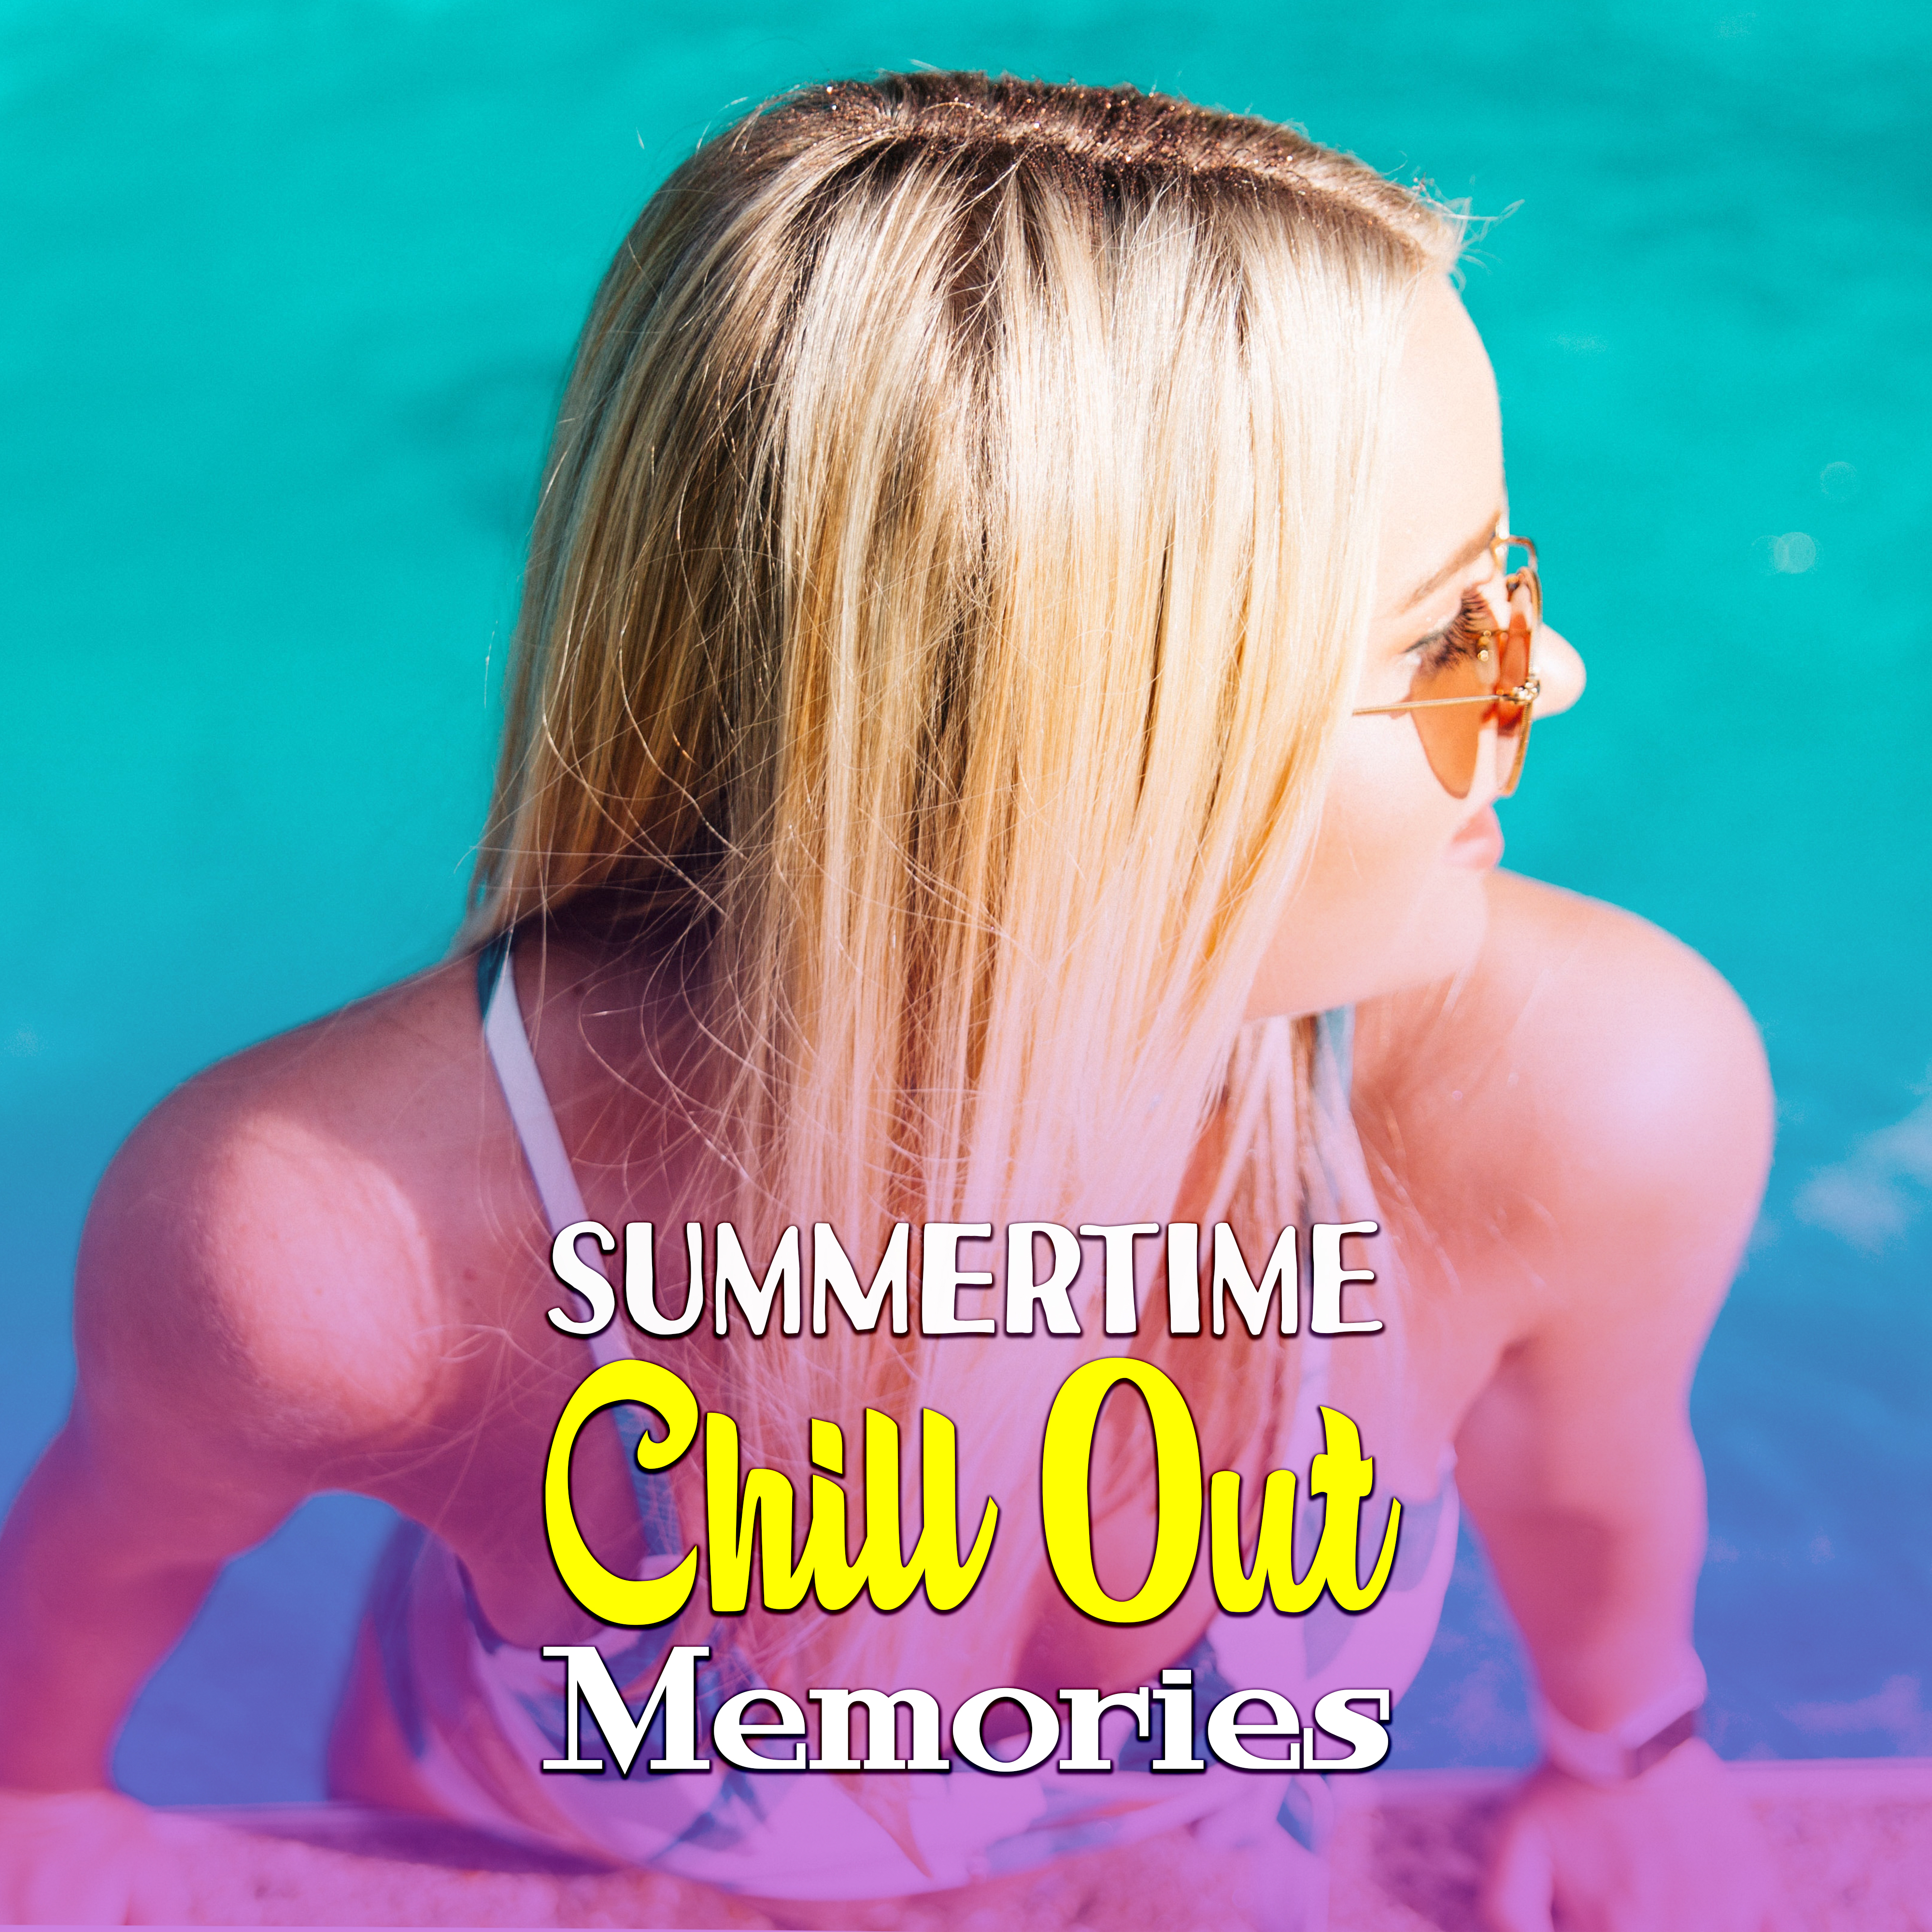 Summertime Chill Out Memories